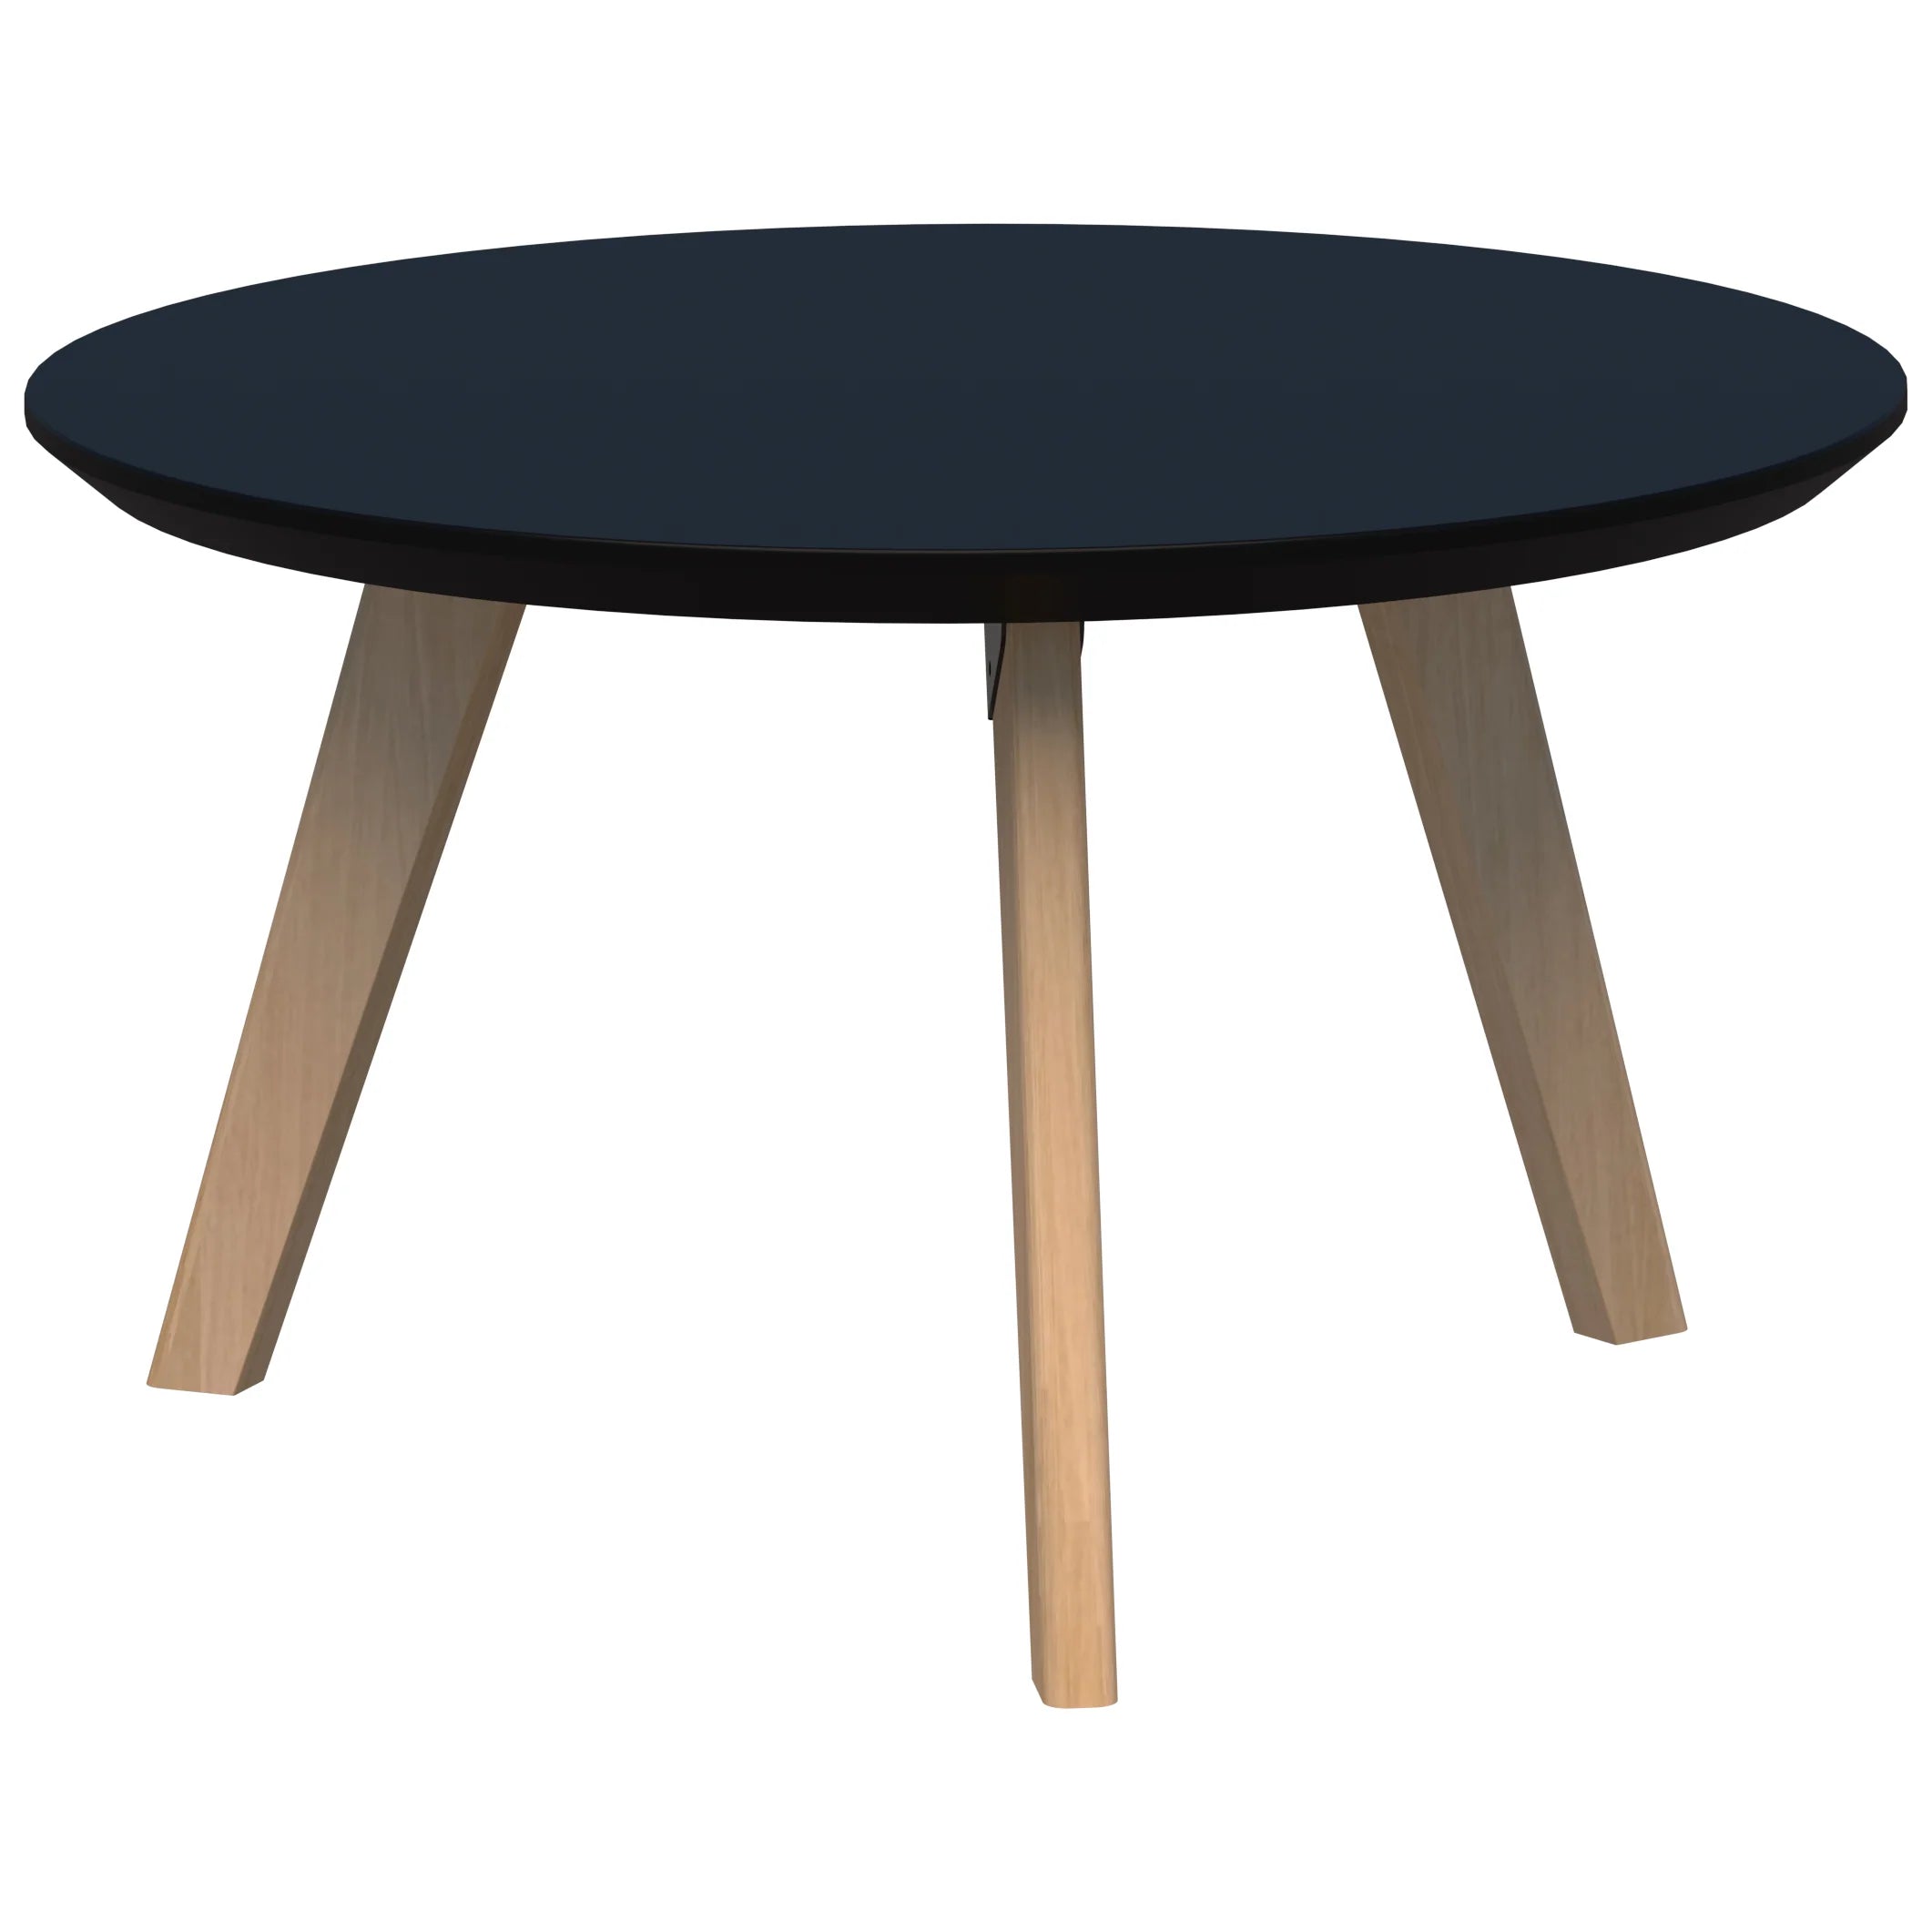 Oslo round coffee table with ash timber frame and black velvet soft matt top.